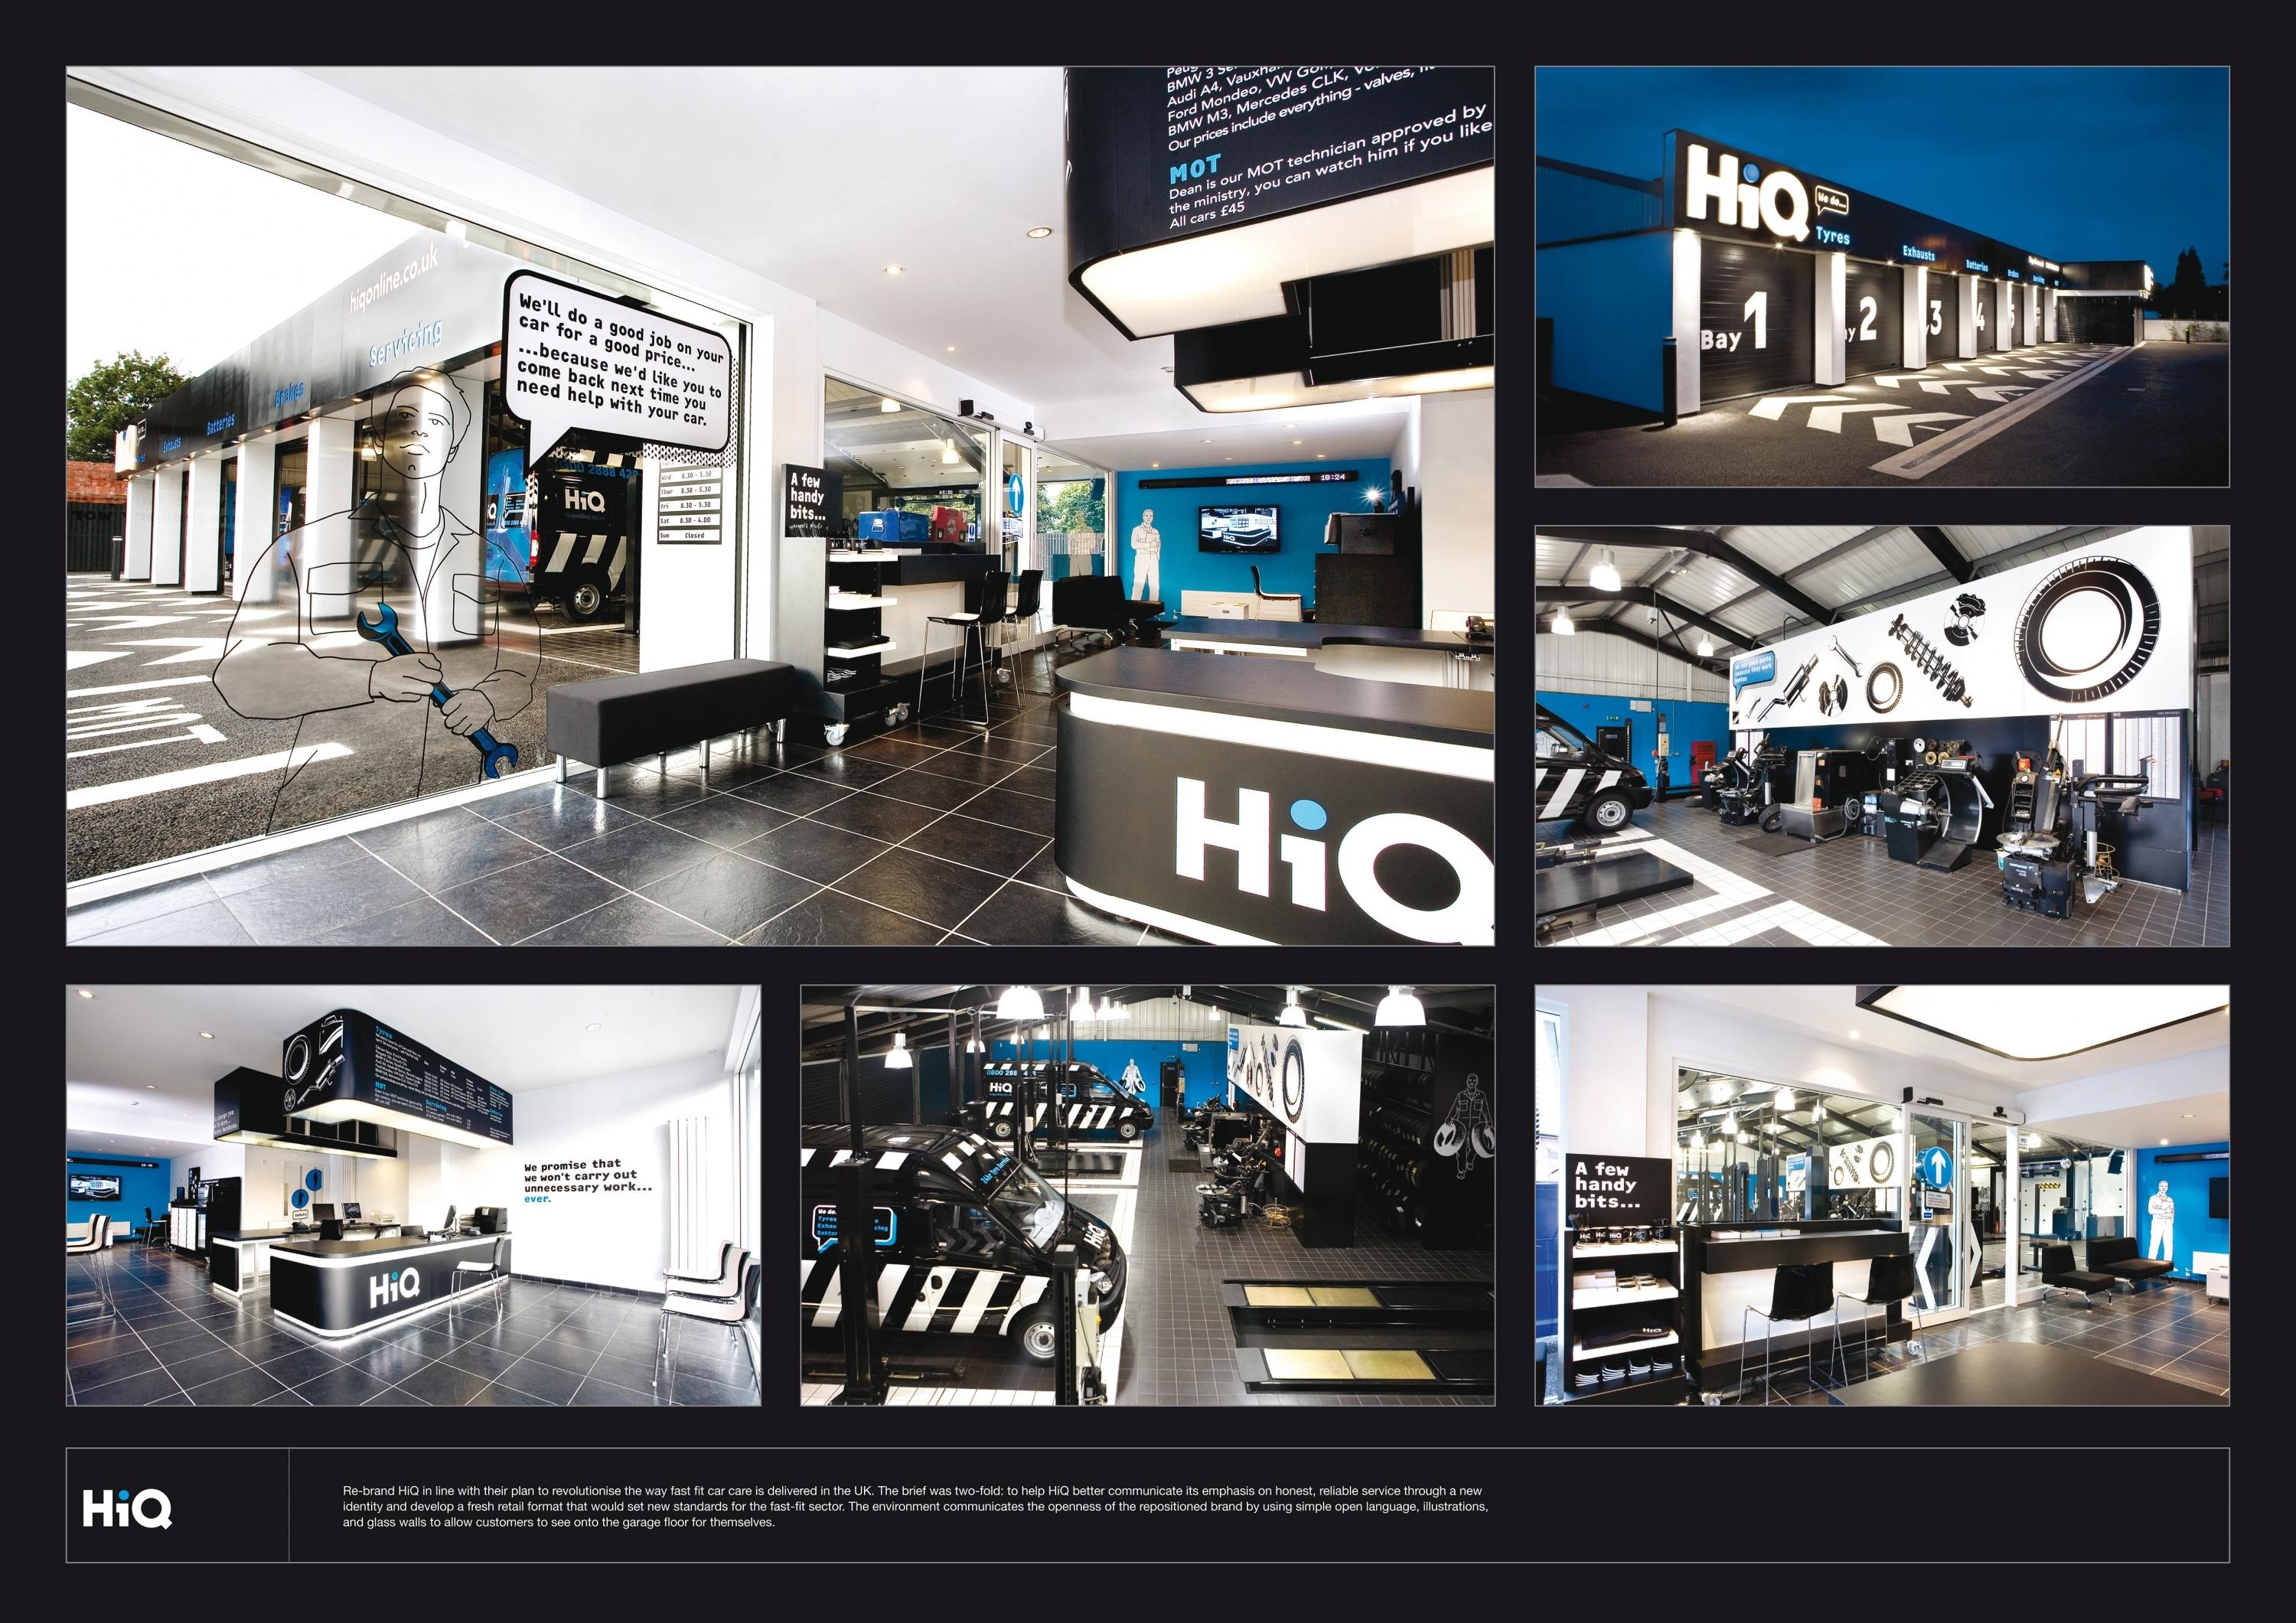 HIQ TYRES AND ACCESSORIES